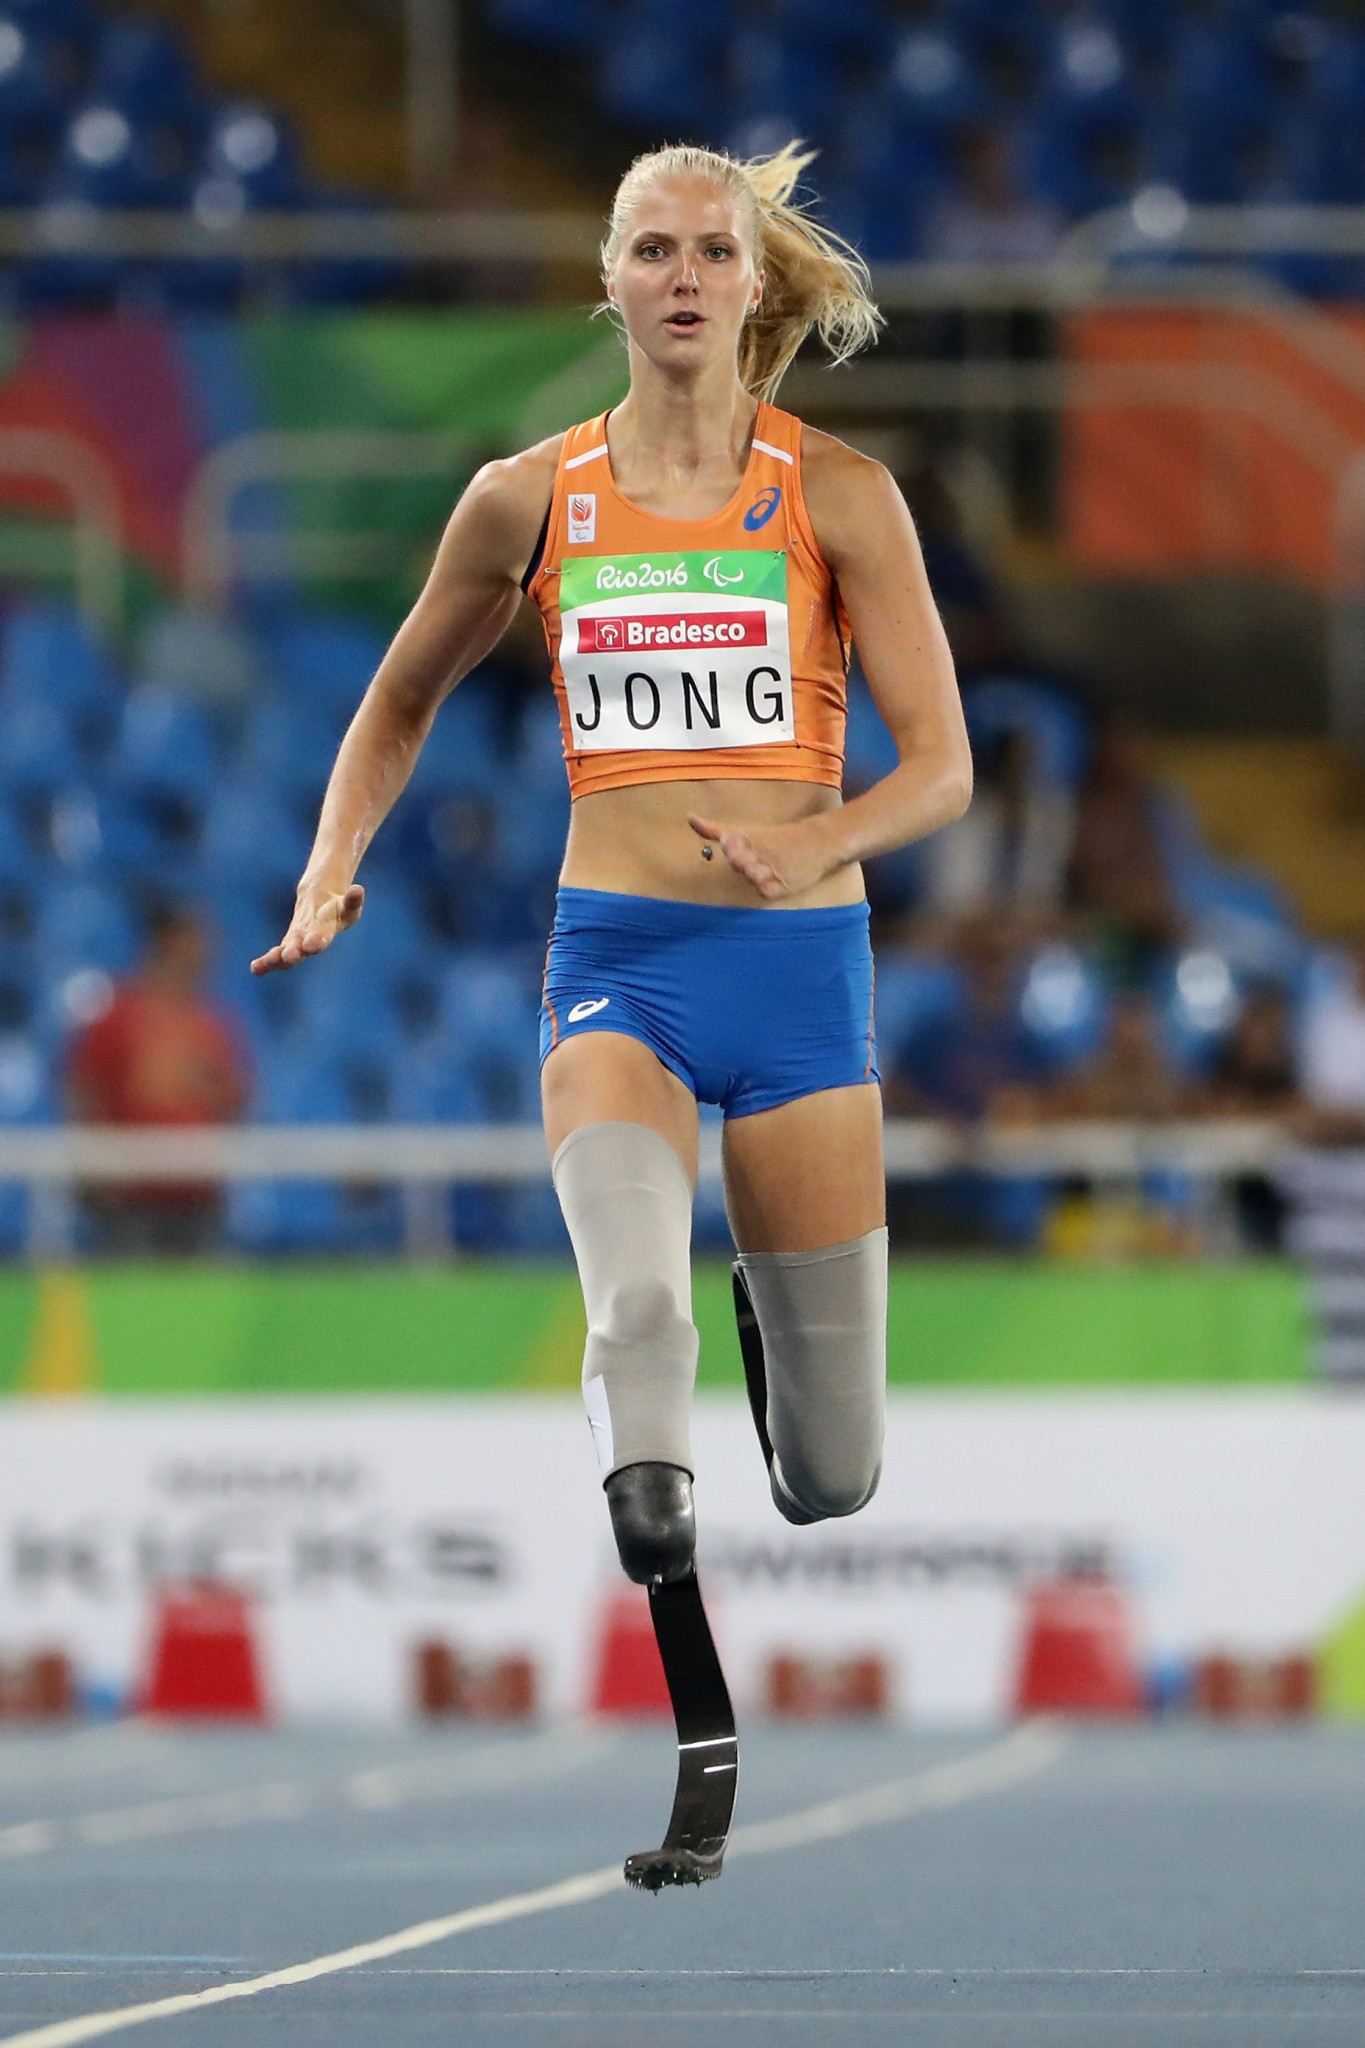 The Netherlands' Fleur Jong is generally considered a sprinter and very much a novice in the long jump ©Getty Images